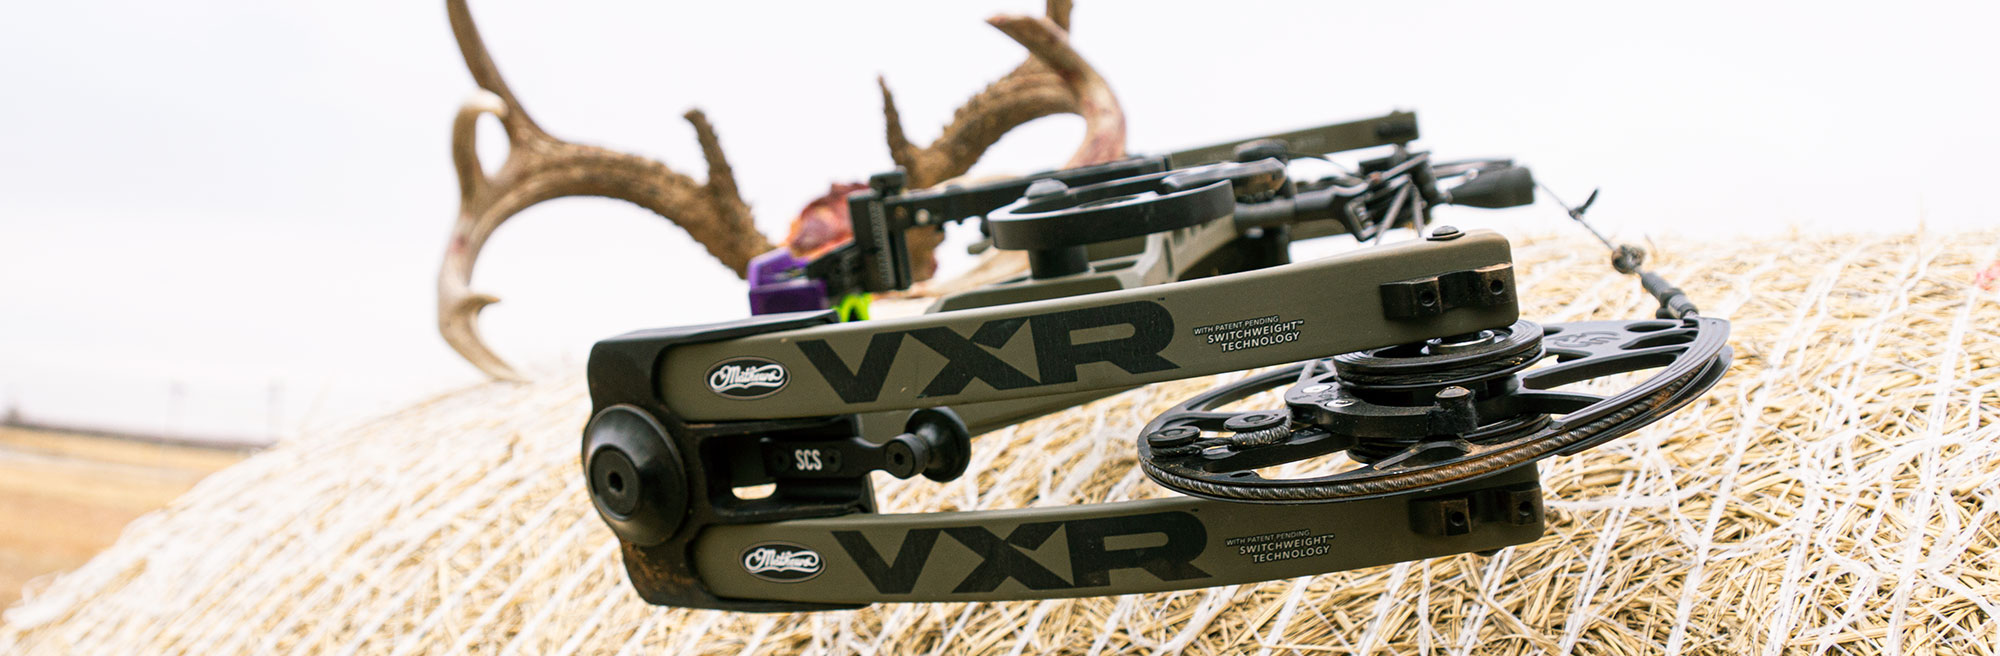 Mathews Triax Axle to Axle Specifications